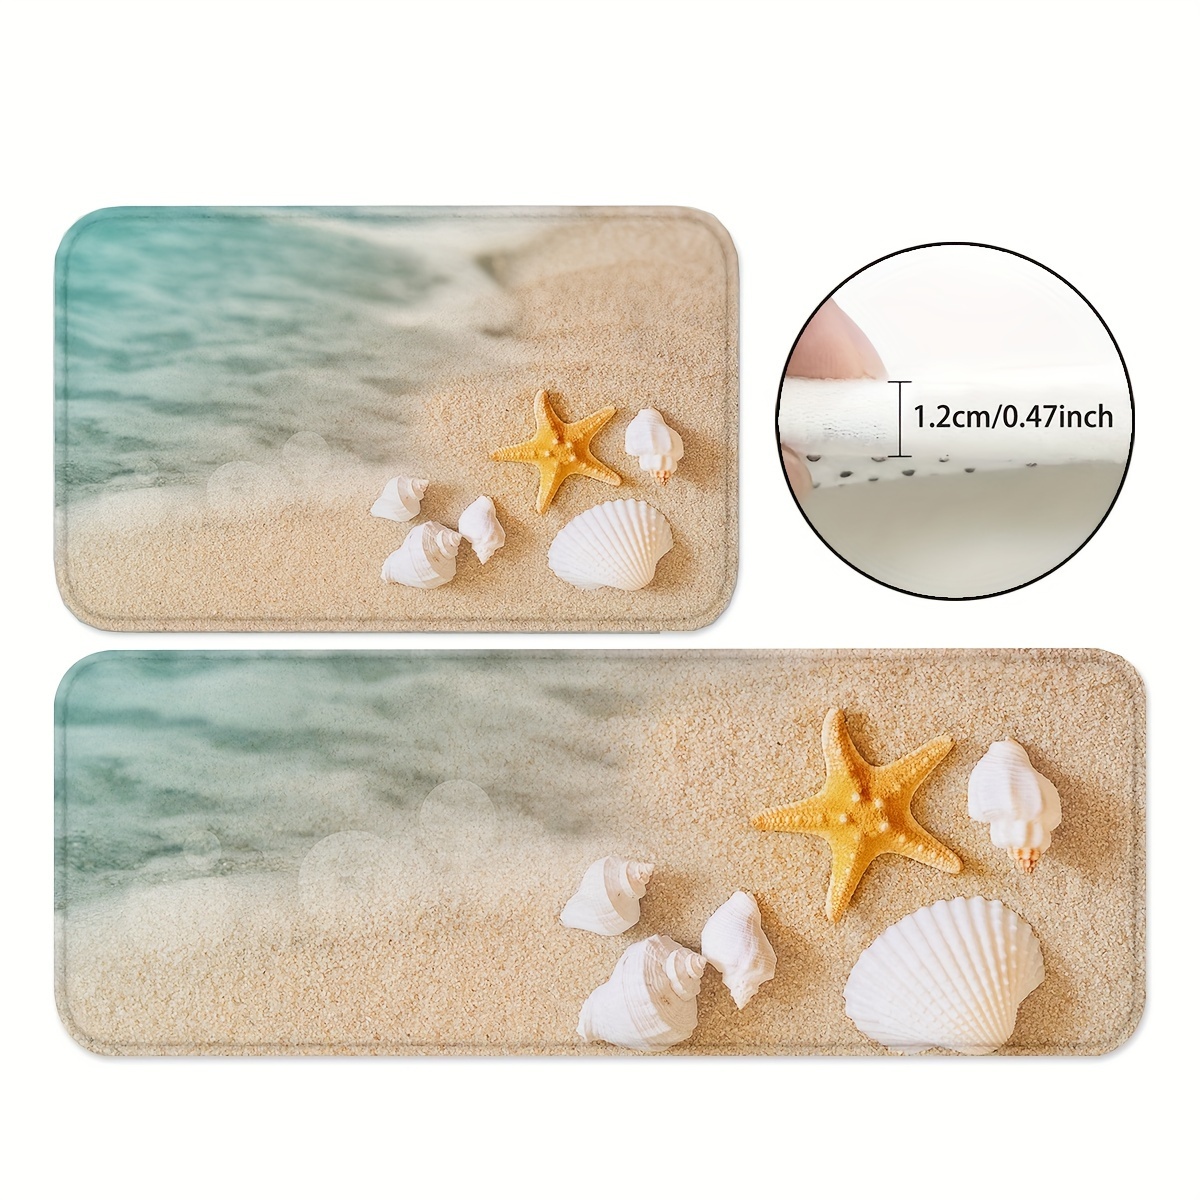 

1/2pcs, Area Rug, Beach Sand Kitchen Mats, Non-slip And Durable Bathroom Pads, Comfortable Standing Runner Rugs, Carpets For Kitchen, Home, Office, Sink, Laundry Room, Bathroom, Spring Decor